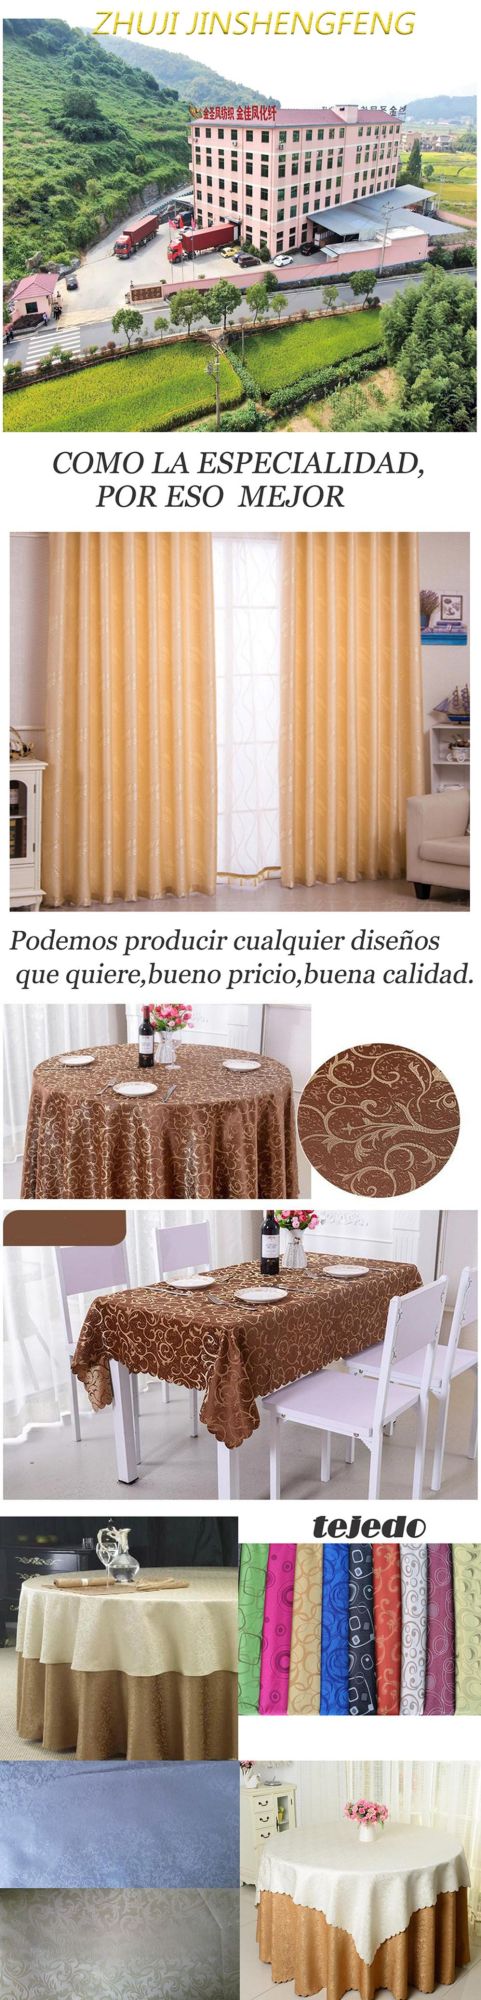 We Are Profession Jacquard Fabric 20 Years, They Are Manly Used in Curtain, Table Cloth, Sofa Cloth